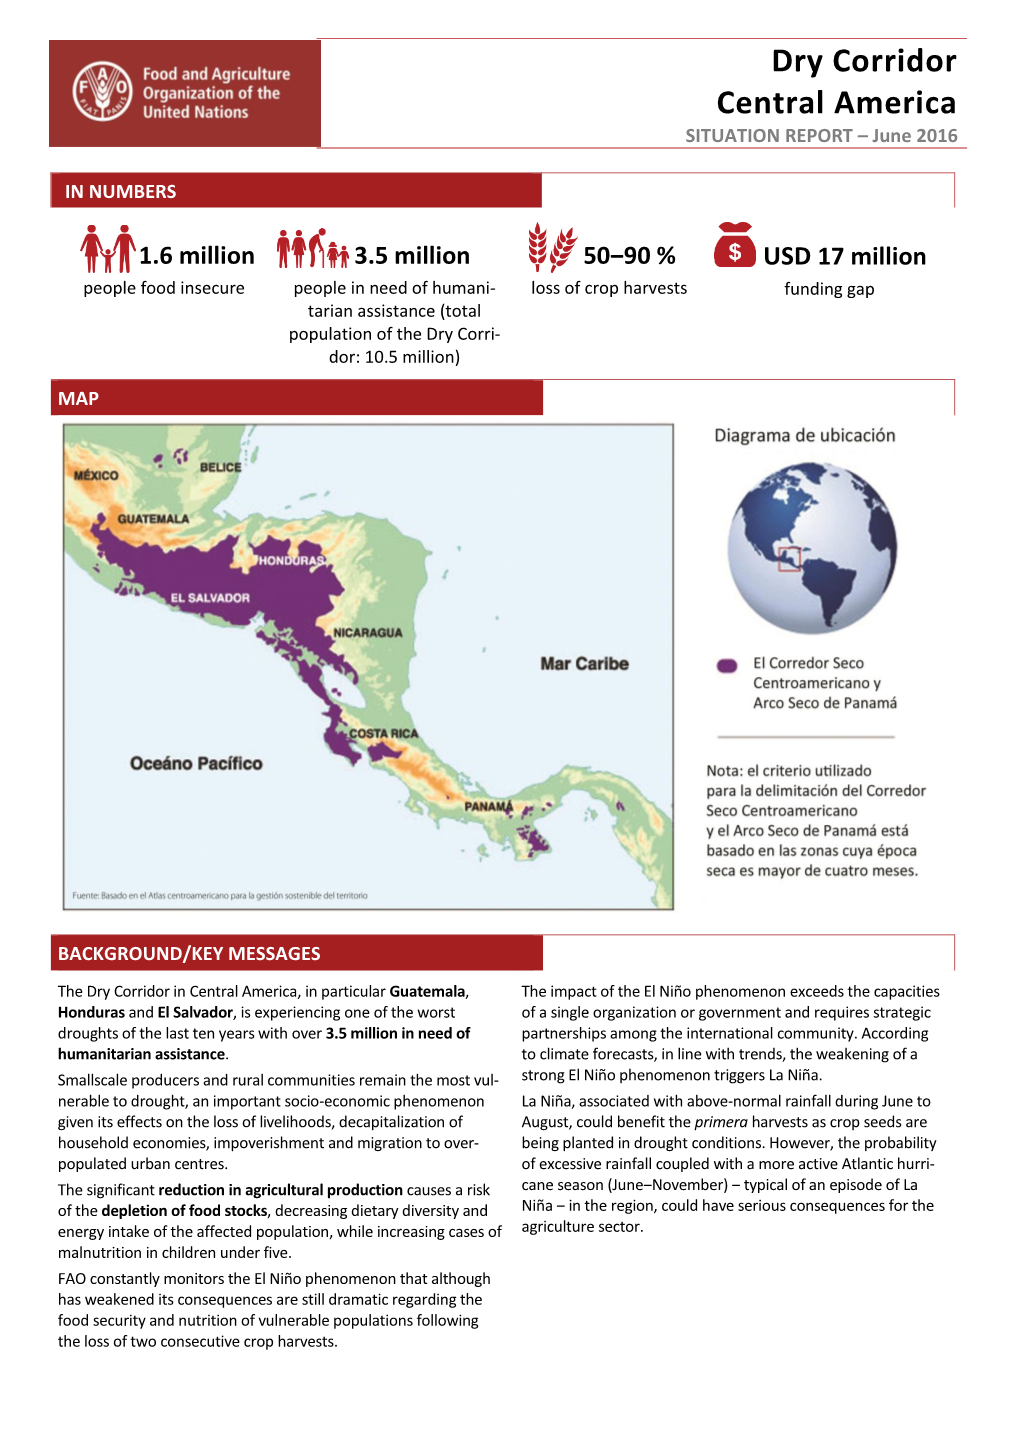 Dry Corridor Central America SITUATION REPORT – June 2016